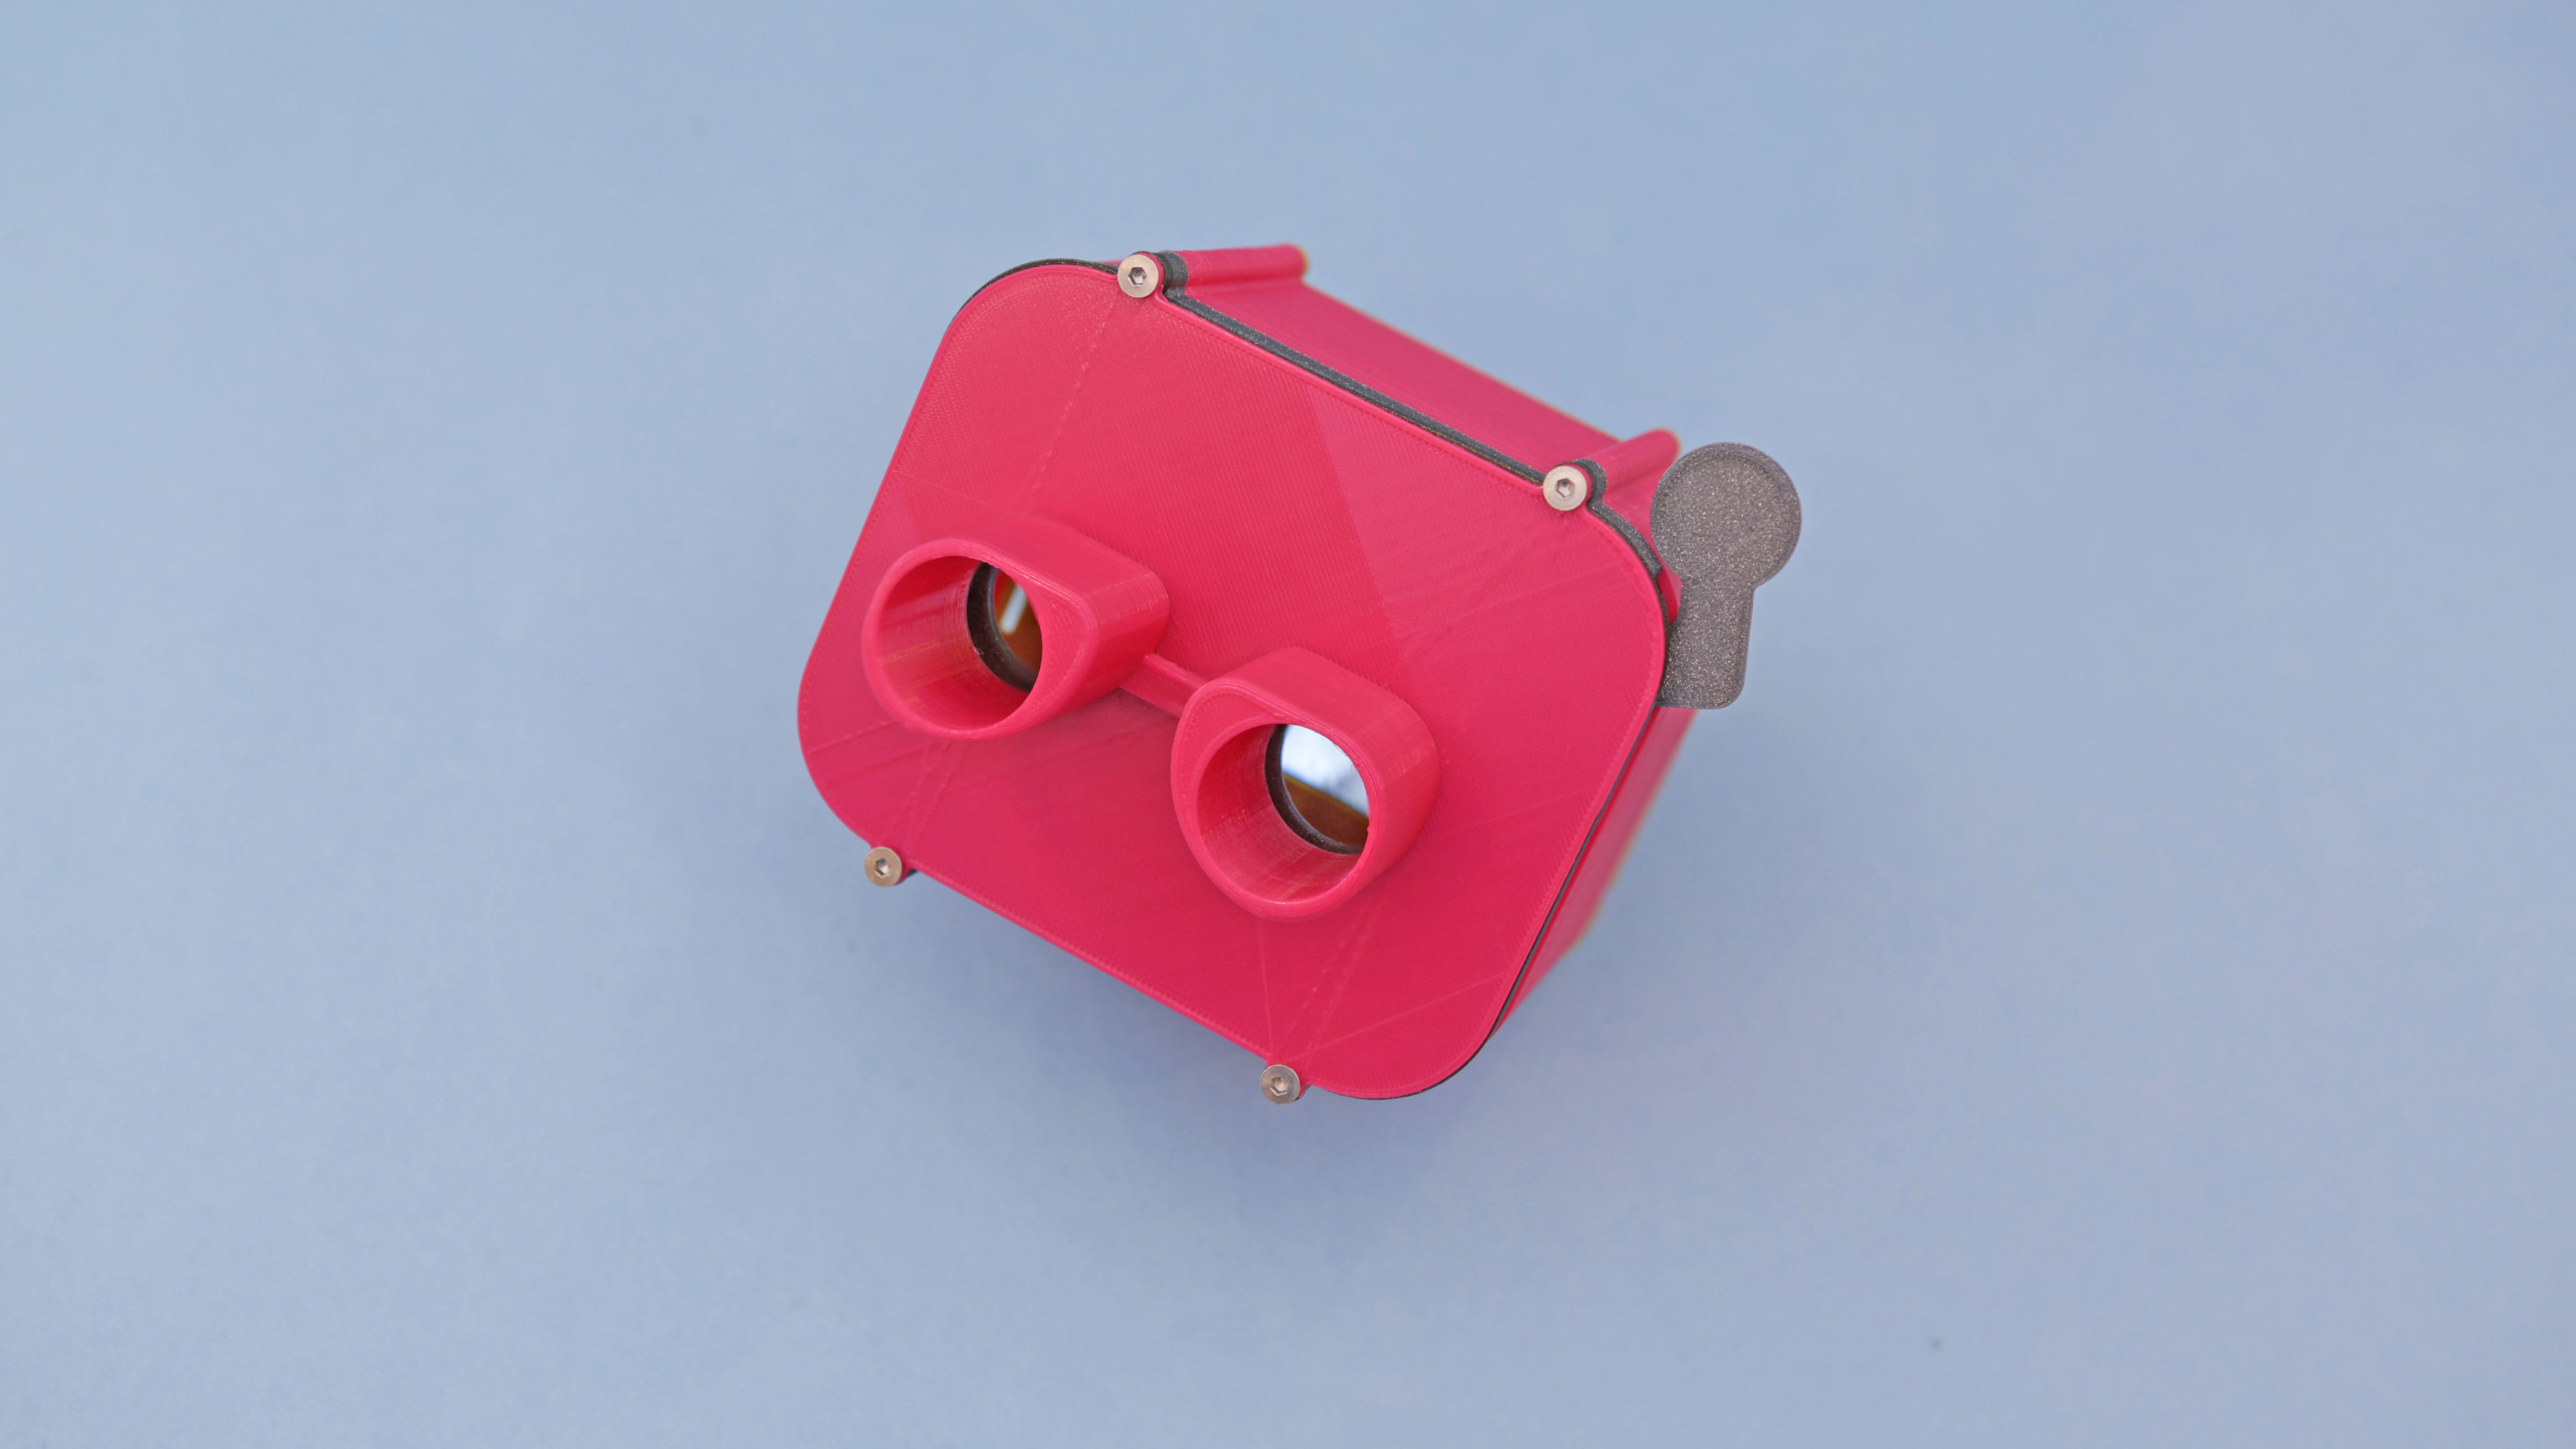 PyPortal View Master by Adafruit